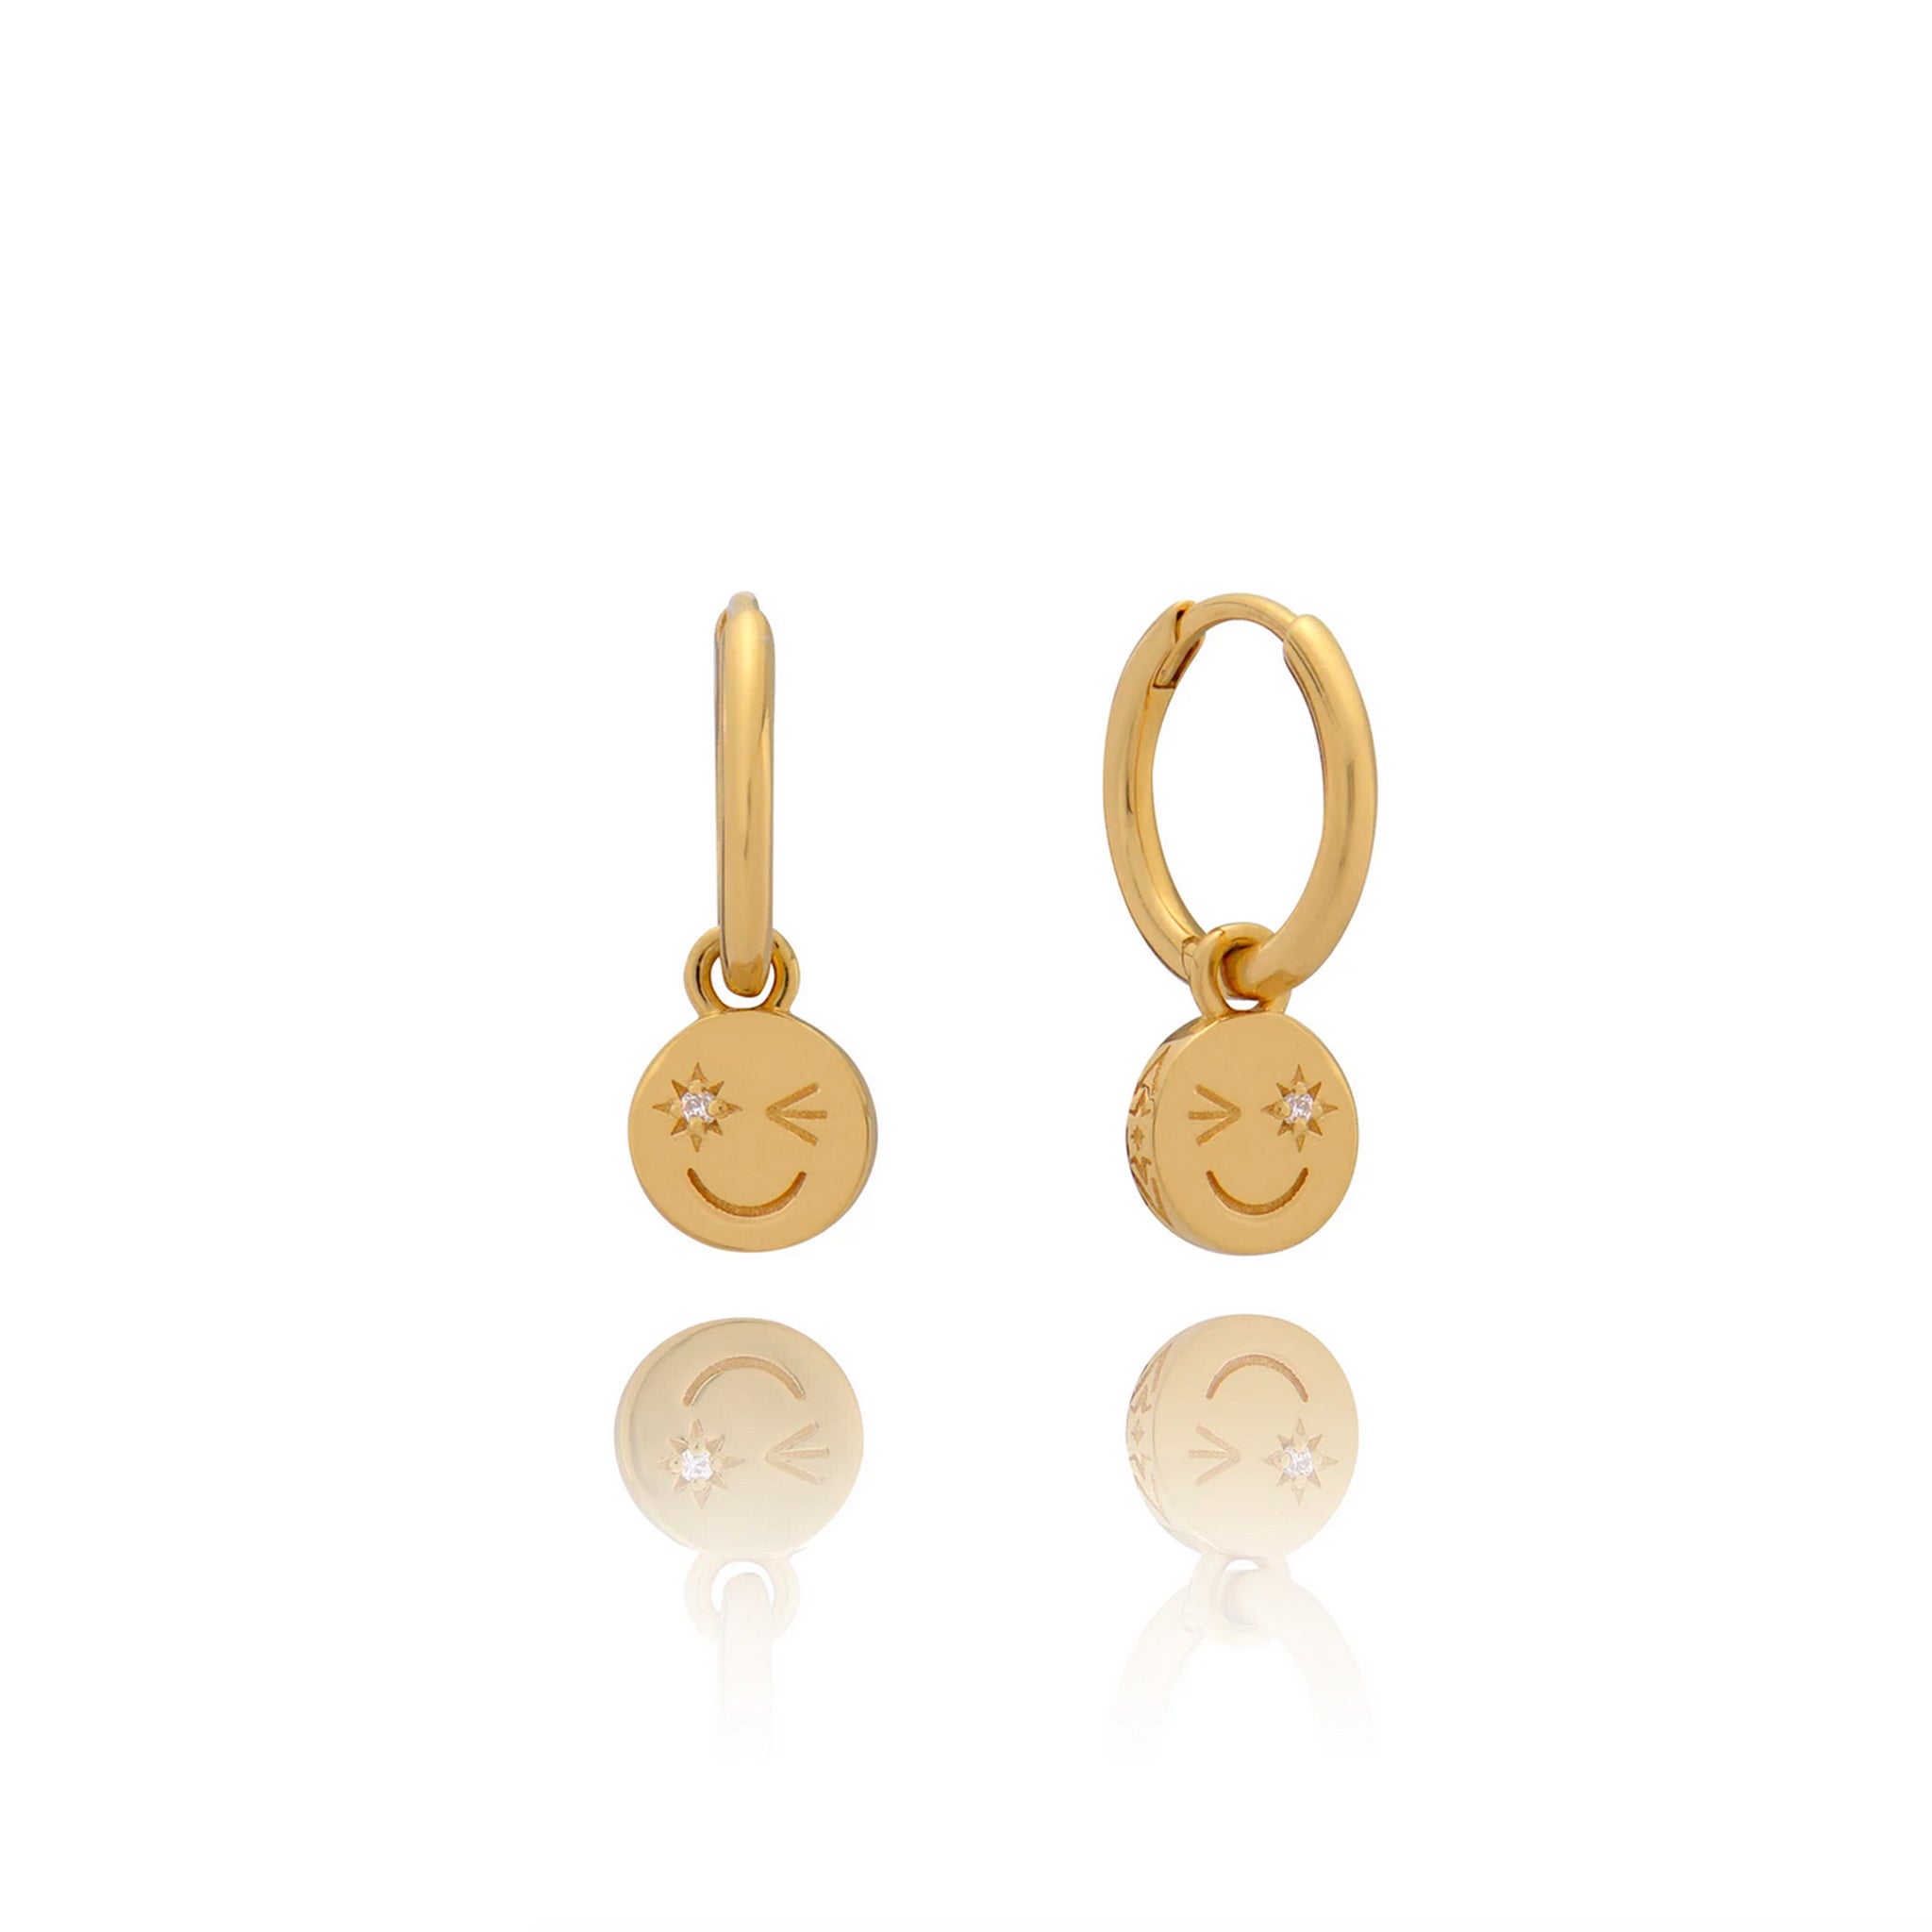 A pair of Happy Face Huggie Hoop Earrings - Gold by Rachel Jackson with a smiley face.